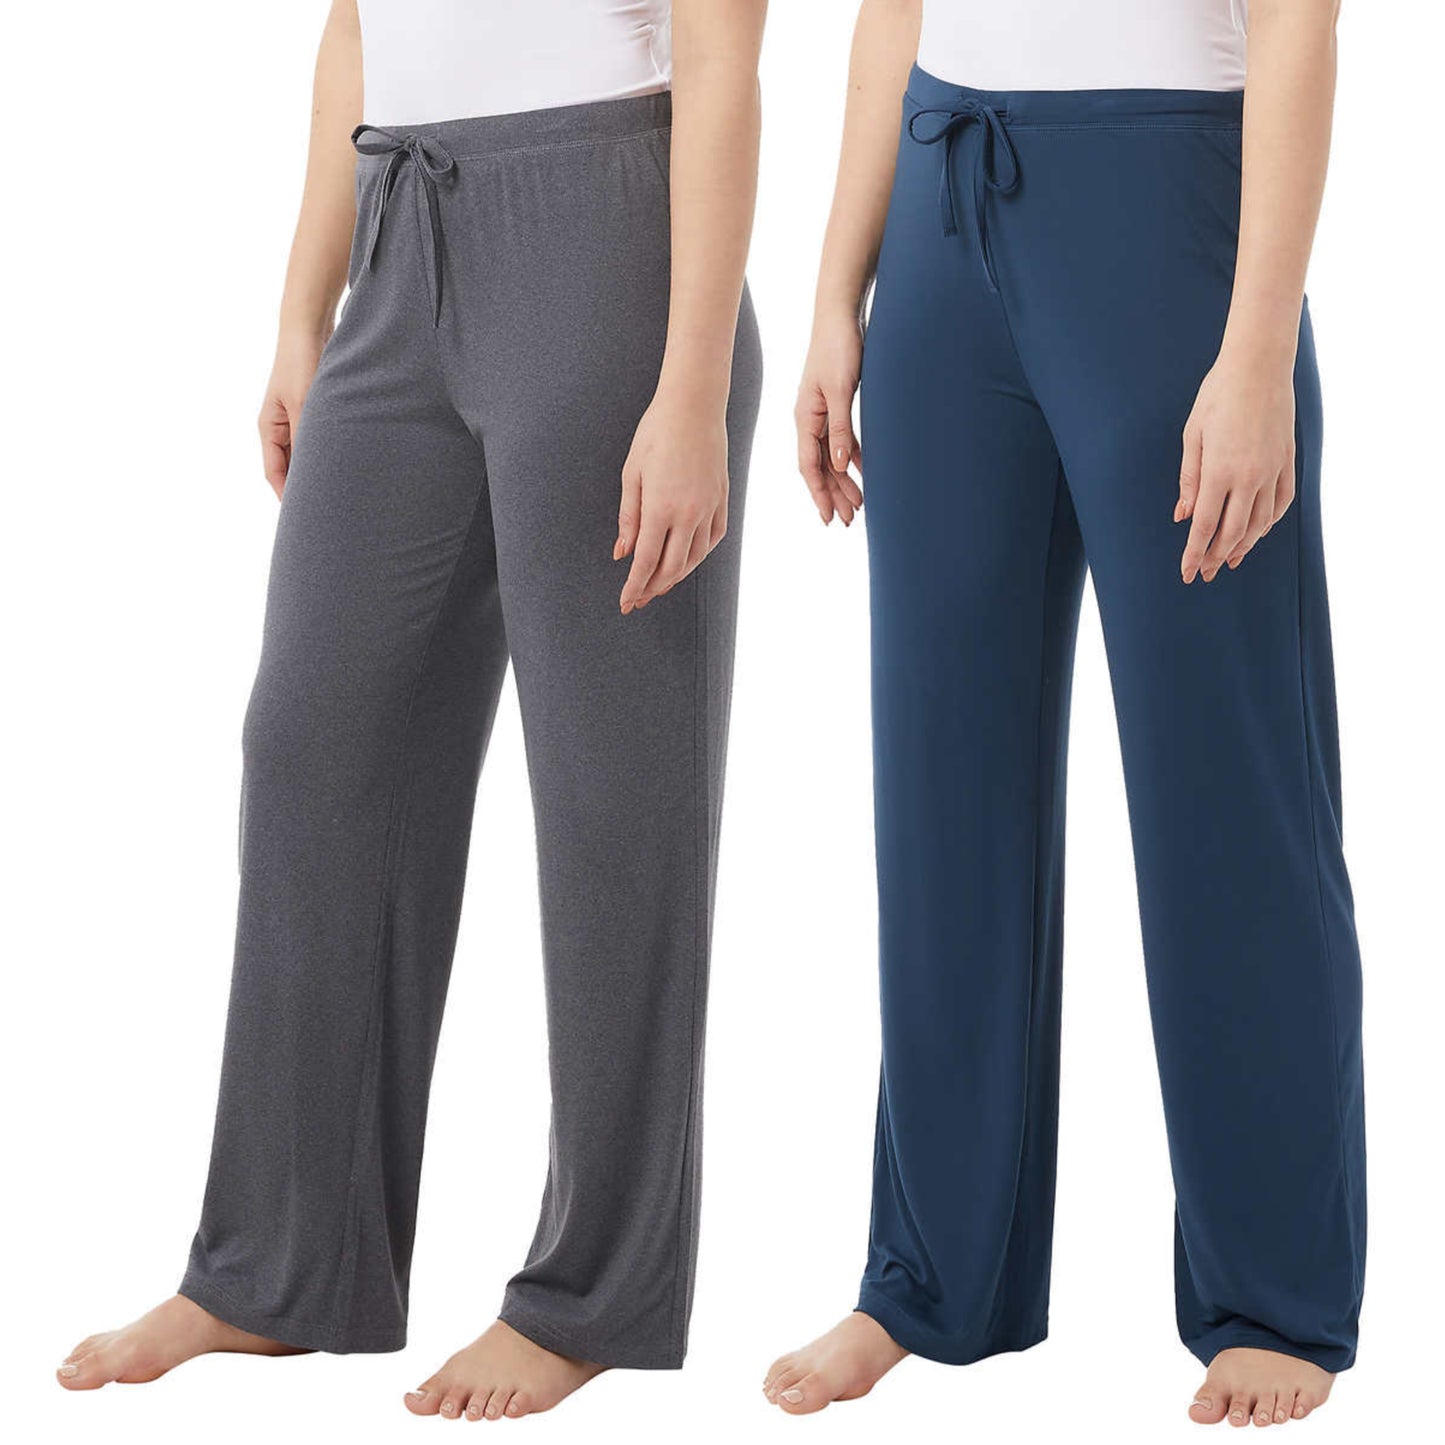 32 Degrees Women's 2-pack Super Soft Lounge Casual Pants